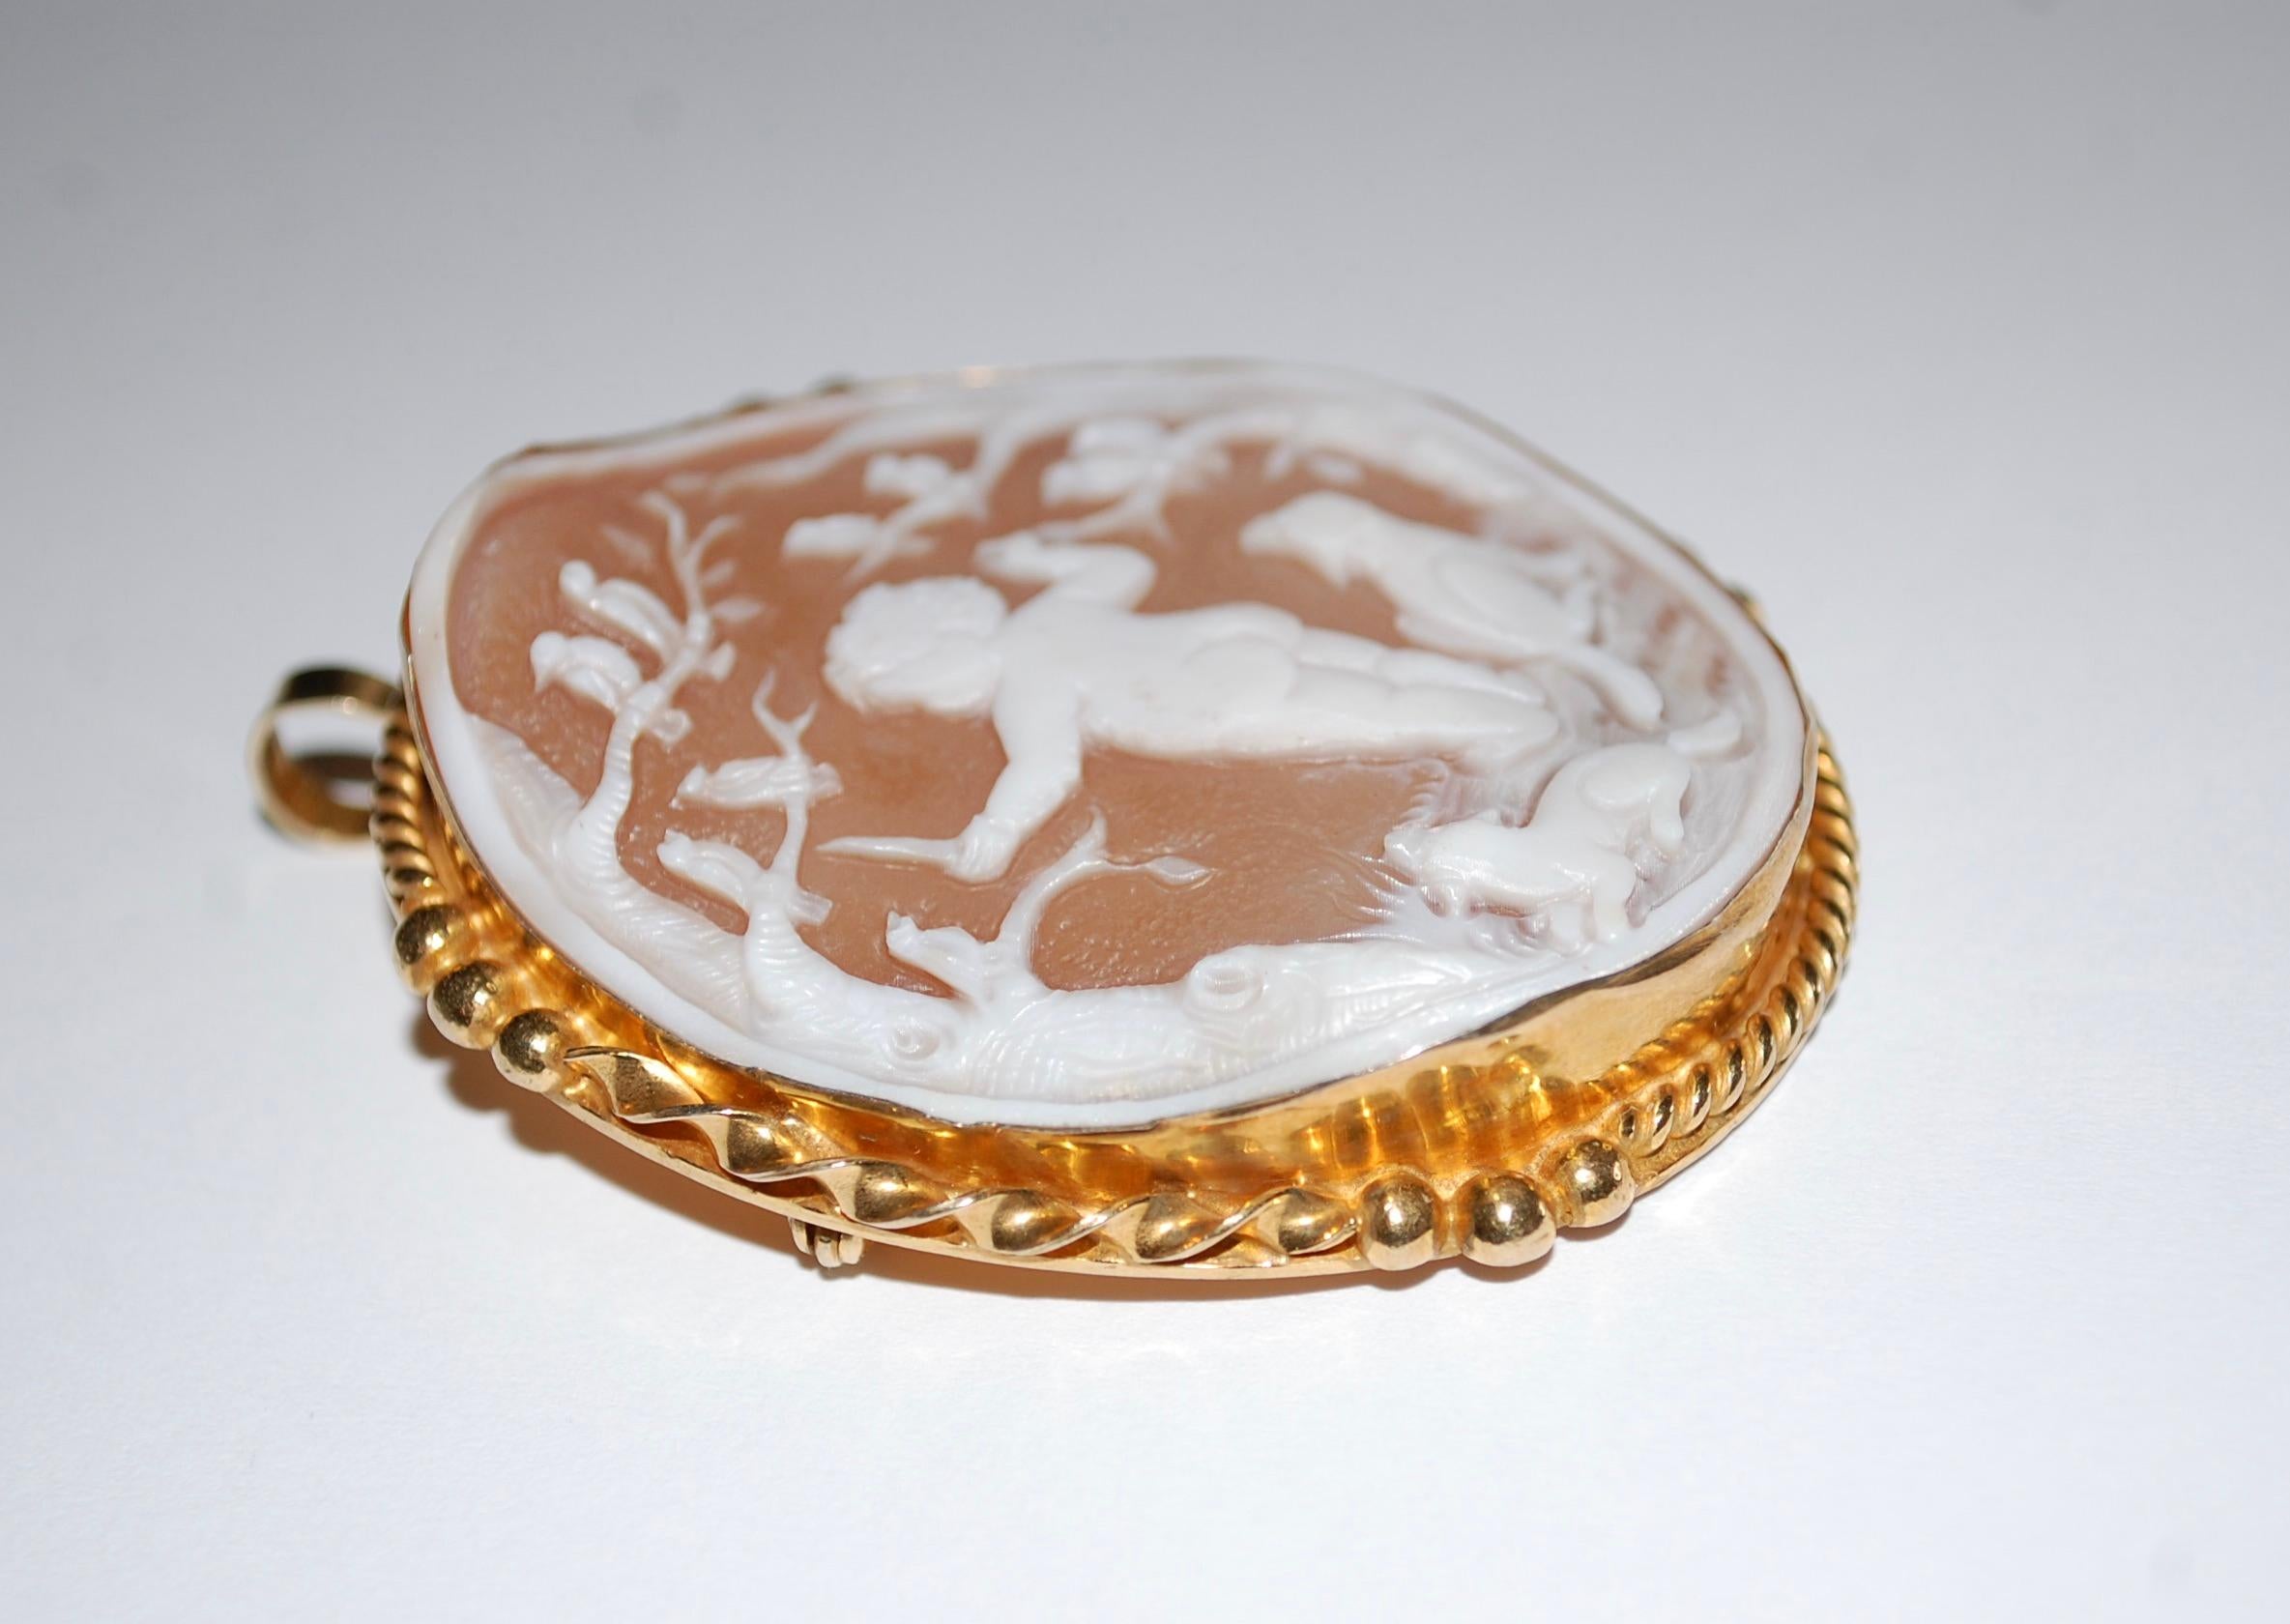 Vintage Large Cameo with Putti  Singing Birds and Dogs
Charming large oval shape cameo pendant or brooch set in tested 14K yellow gold, illegible artist signed on the back. A wonderful quality to showcase the intricate detail work that makes cameos